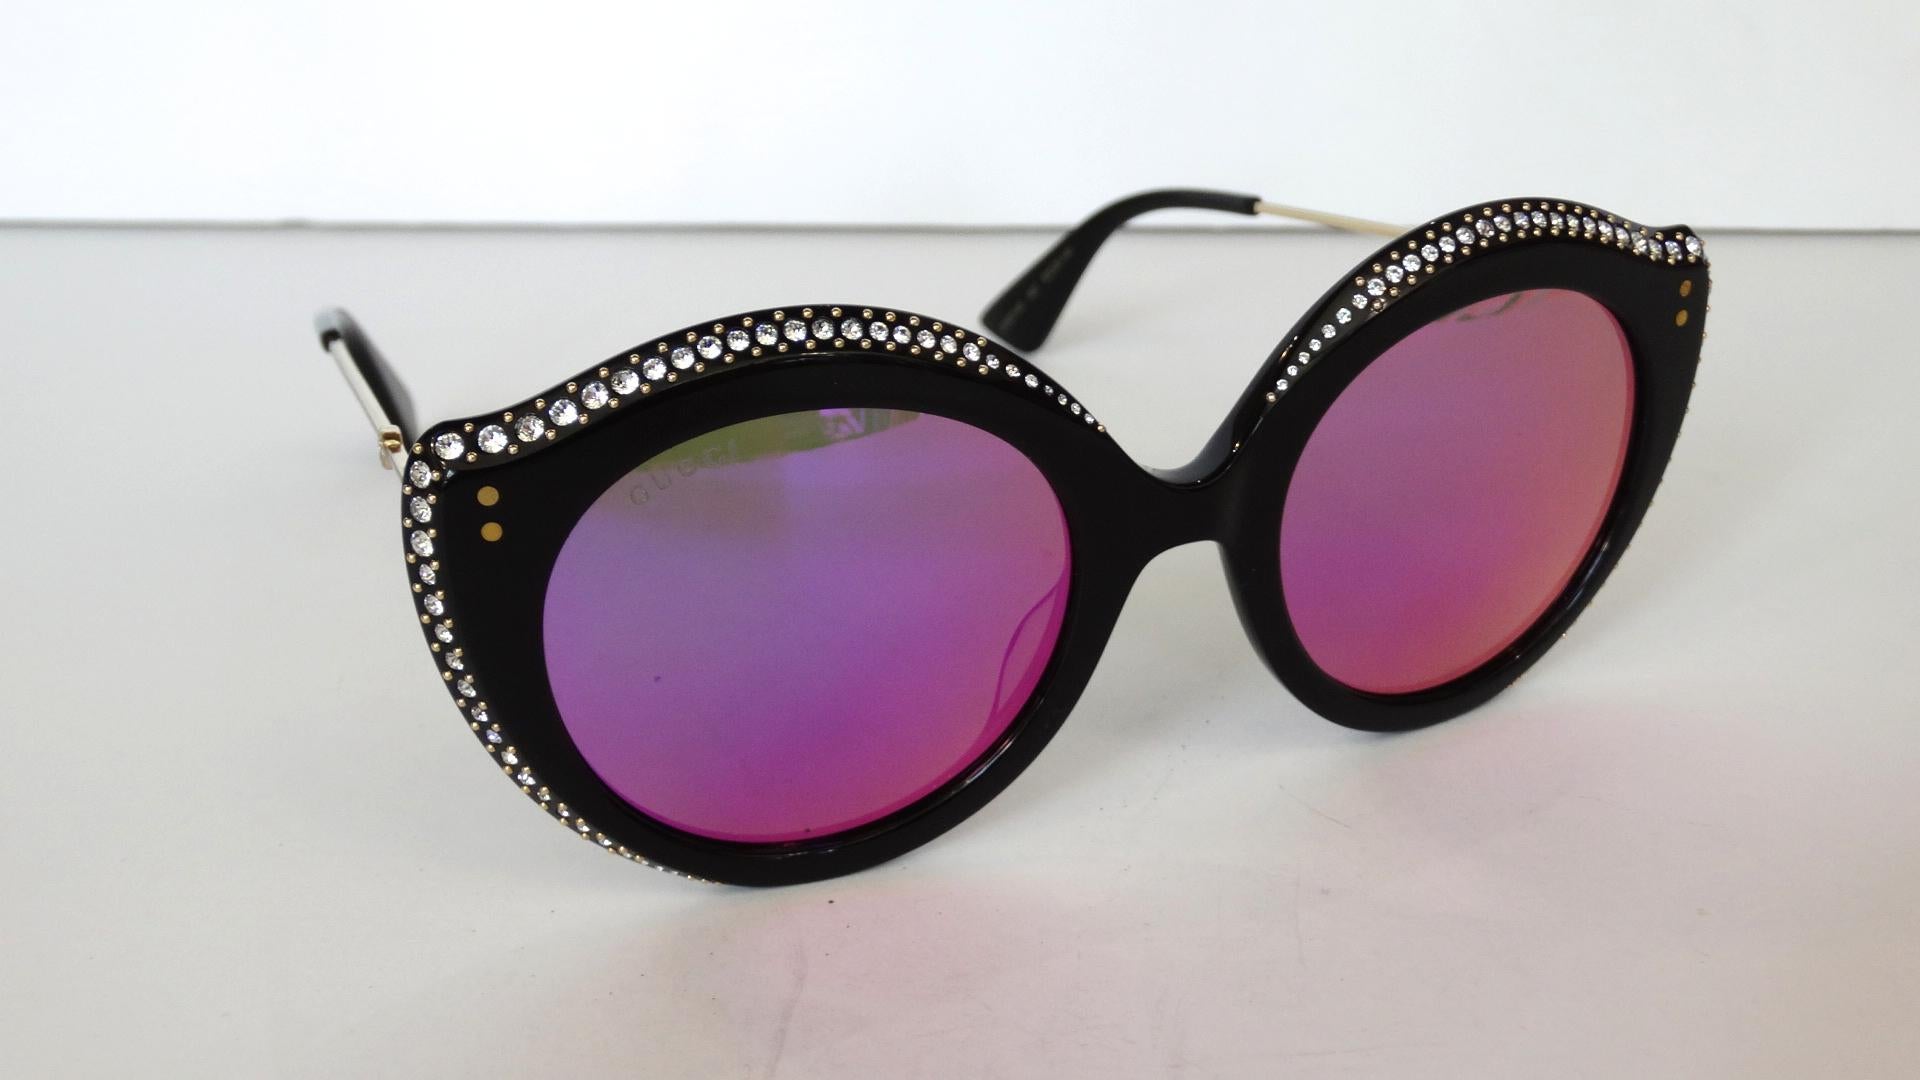 Add some drama to your sunglass collection with our amazing Gucci color shifting cat eye glasses! Black enamel frames in unique oversized cat eye shape, trimmed with crystalline rhinestones all along the edges. Color shifting lenses change from pink